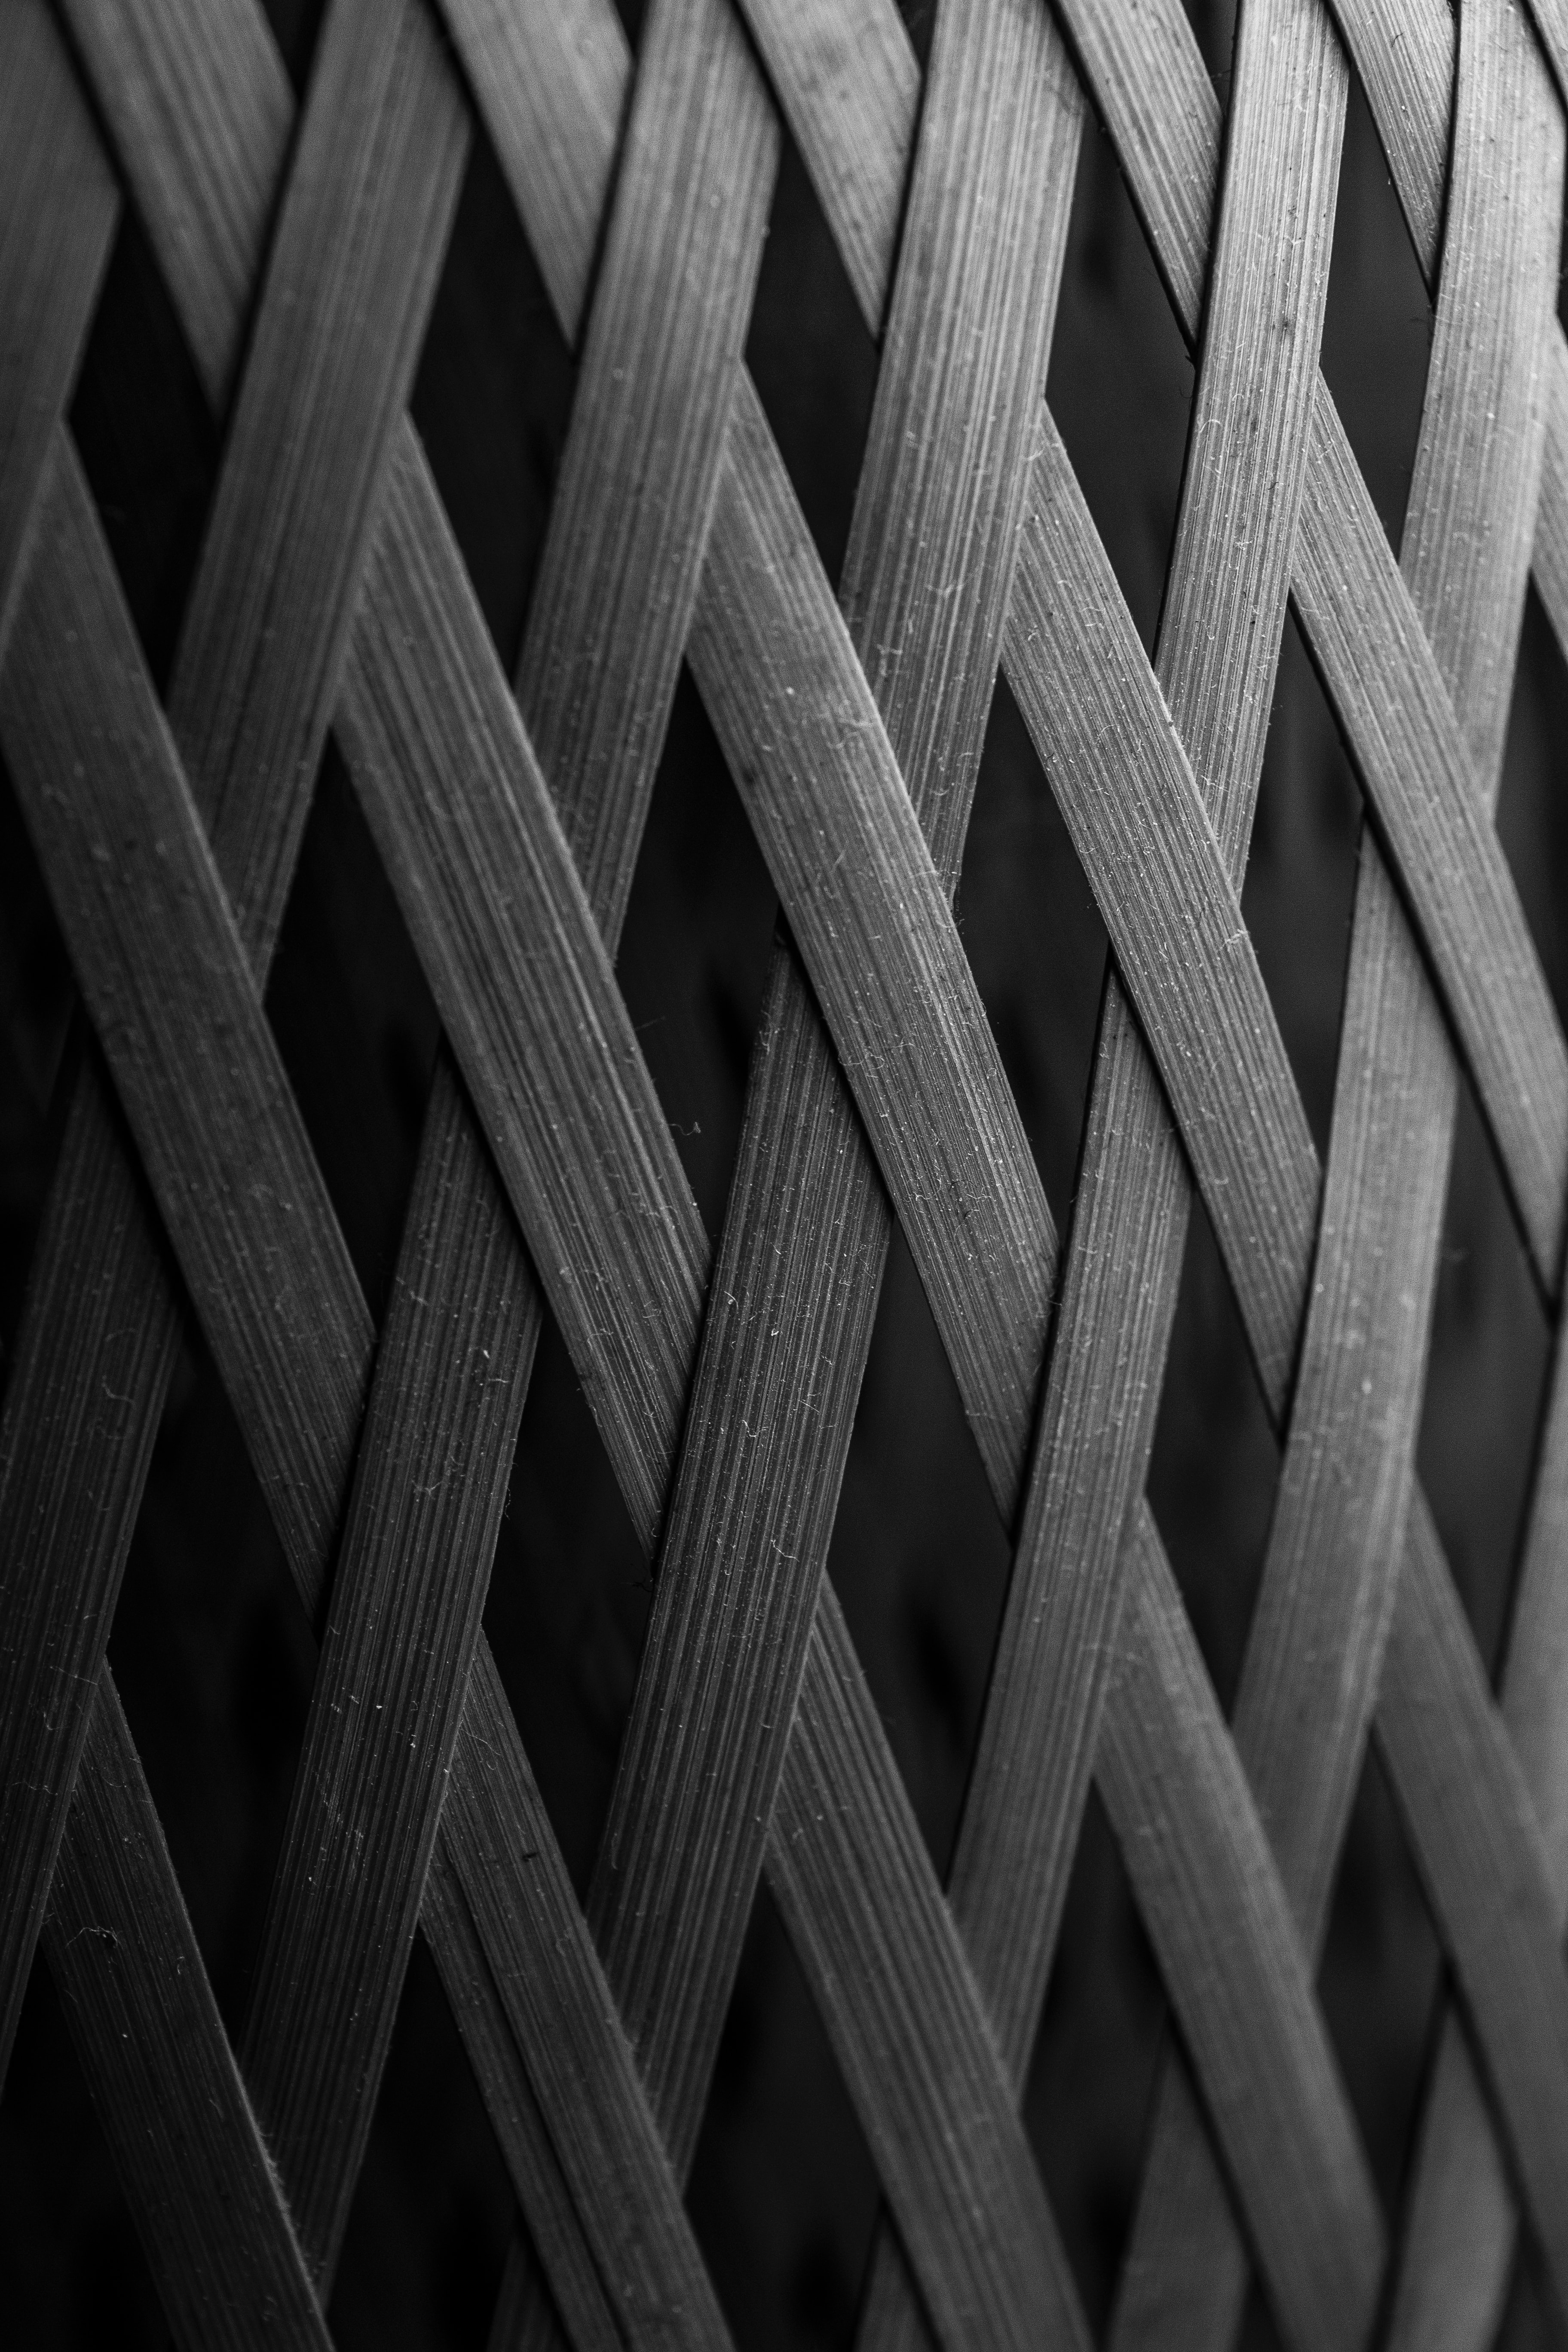 facade, wooden, chb, texture, wood, textures, fence, bw